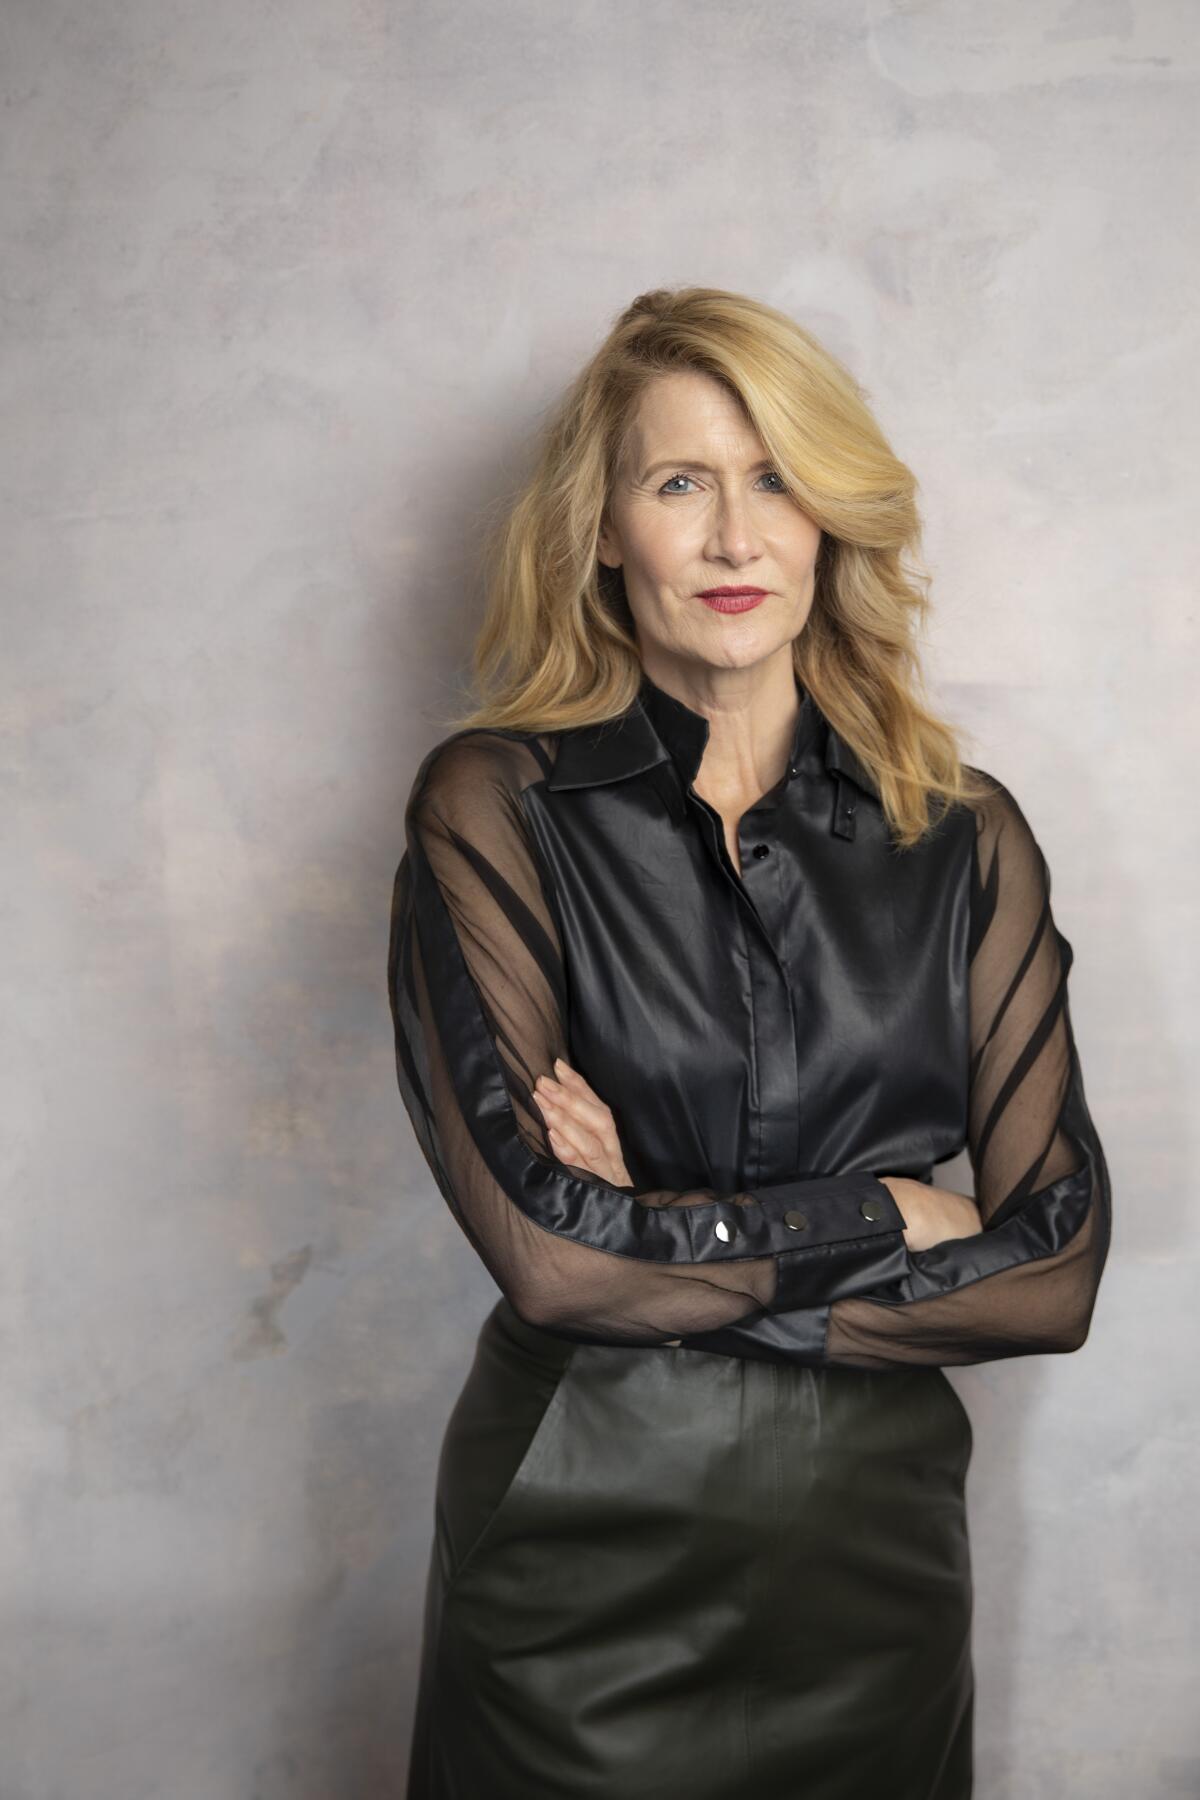 Laura Dern is nominated in the supporting actress category for her role in "Marriage Story."